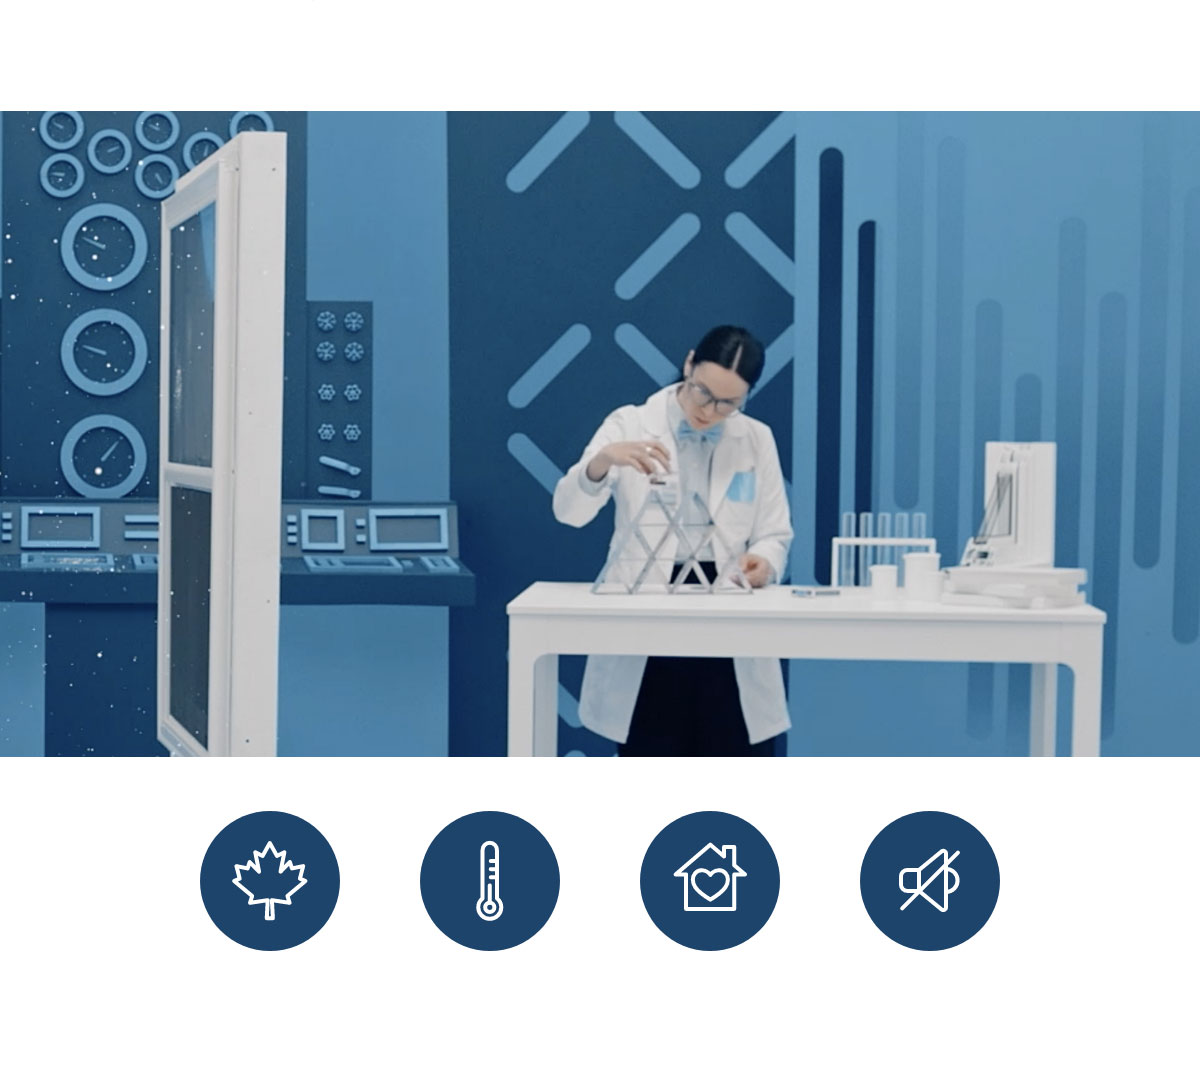 Image of window and woman sleeping on a table in a lab settings. Icons with Canada leaf, temperature, home and mute.